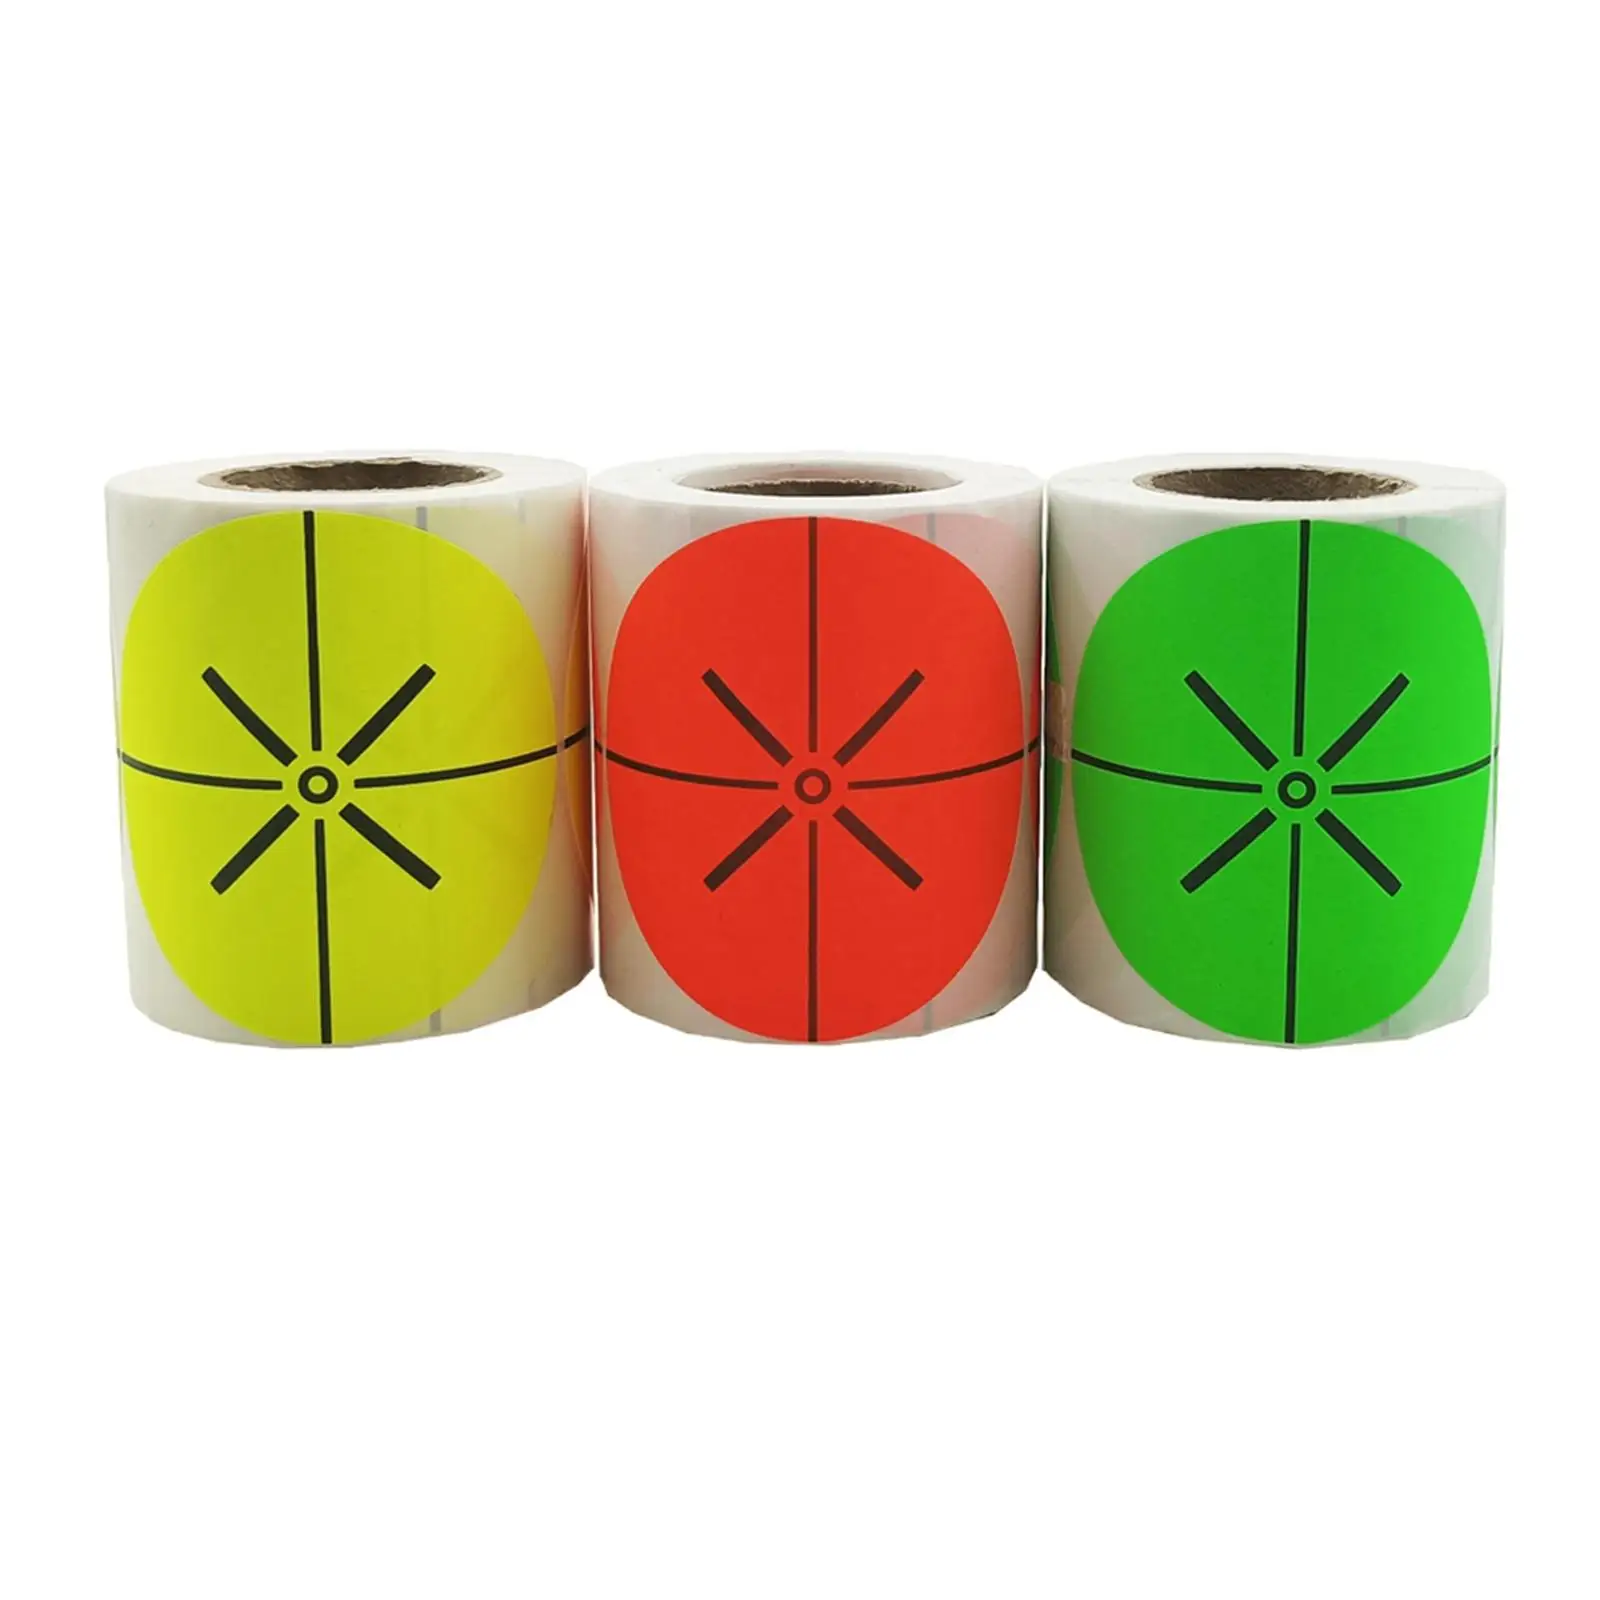 200Pcs Round Shooting Targets, Paper Targets High Visibility Adhesive Target Stickers